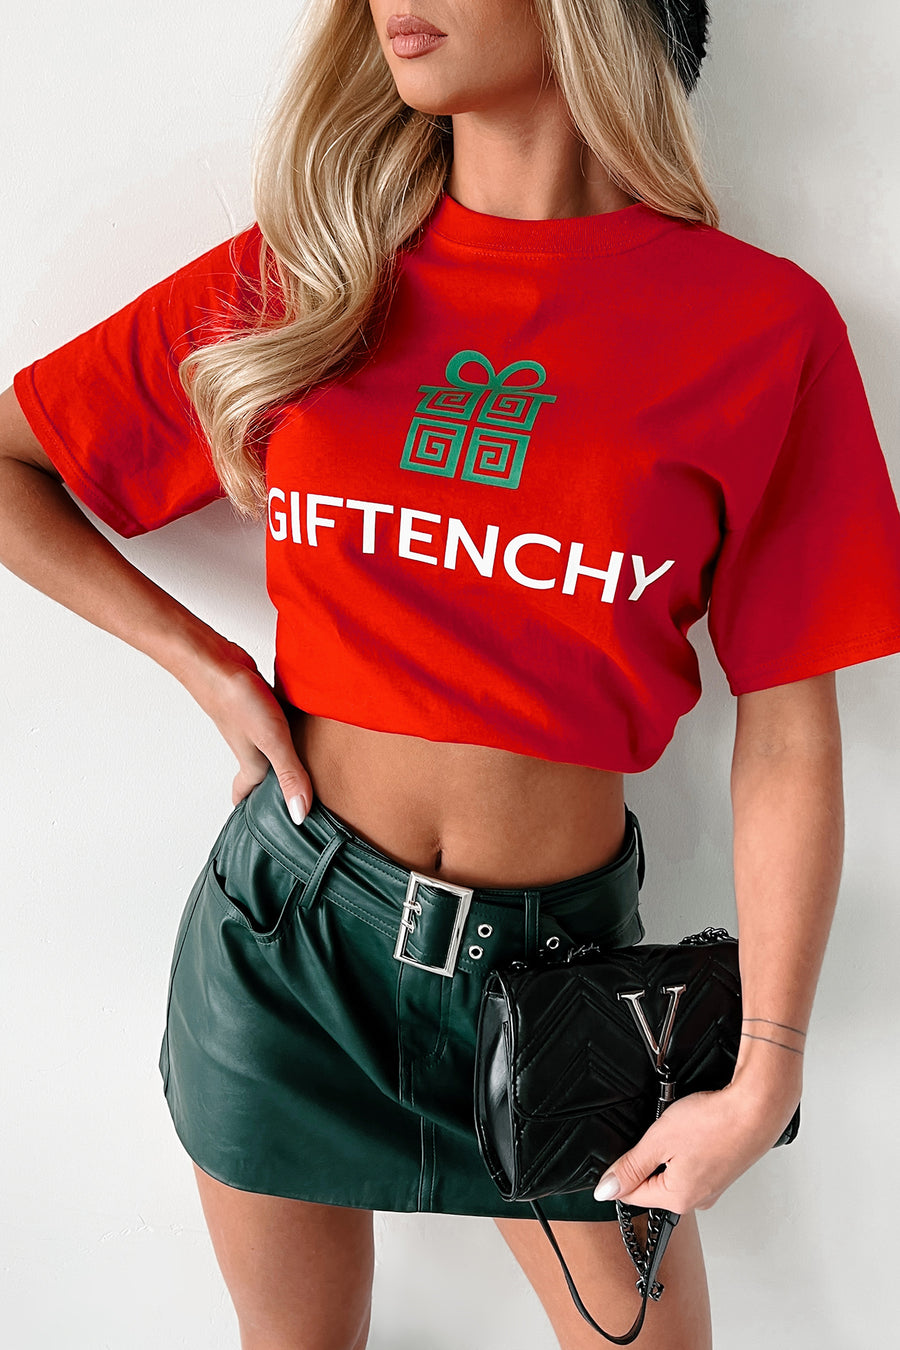 Doorbuster "GIFTENCHY" Graphic T-Shirt (Red) - Print On Demand - NanaMacs